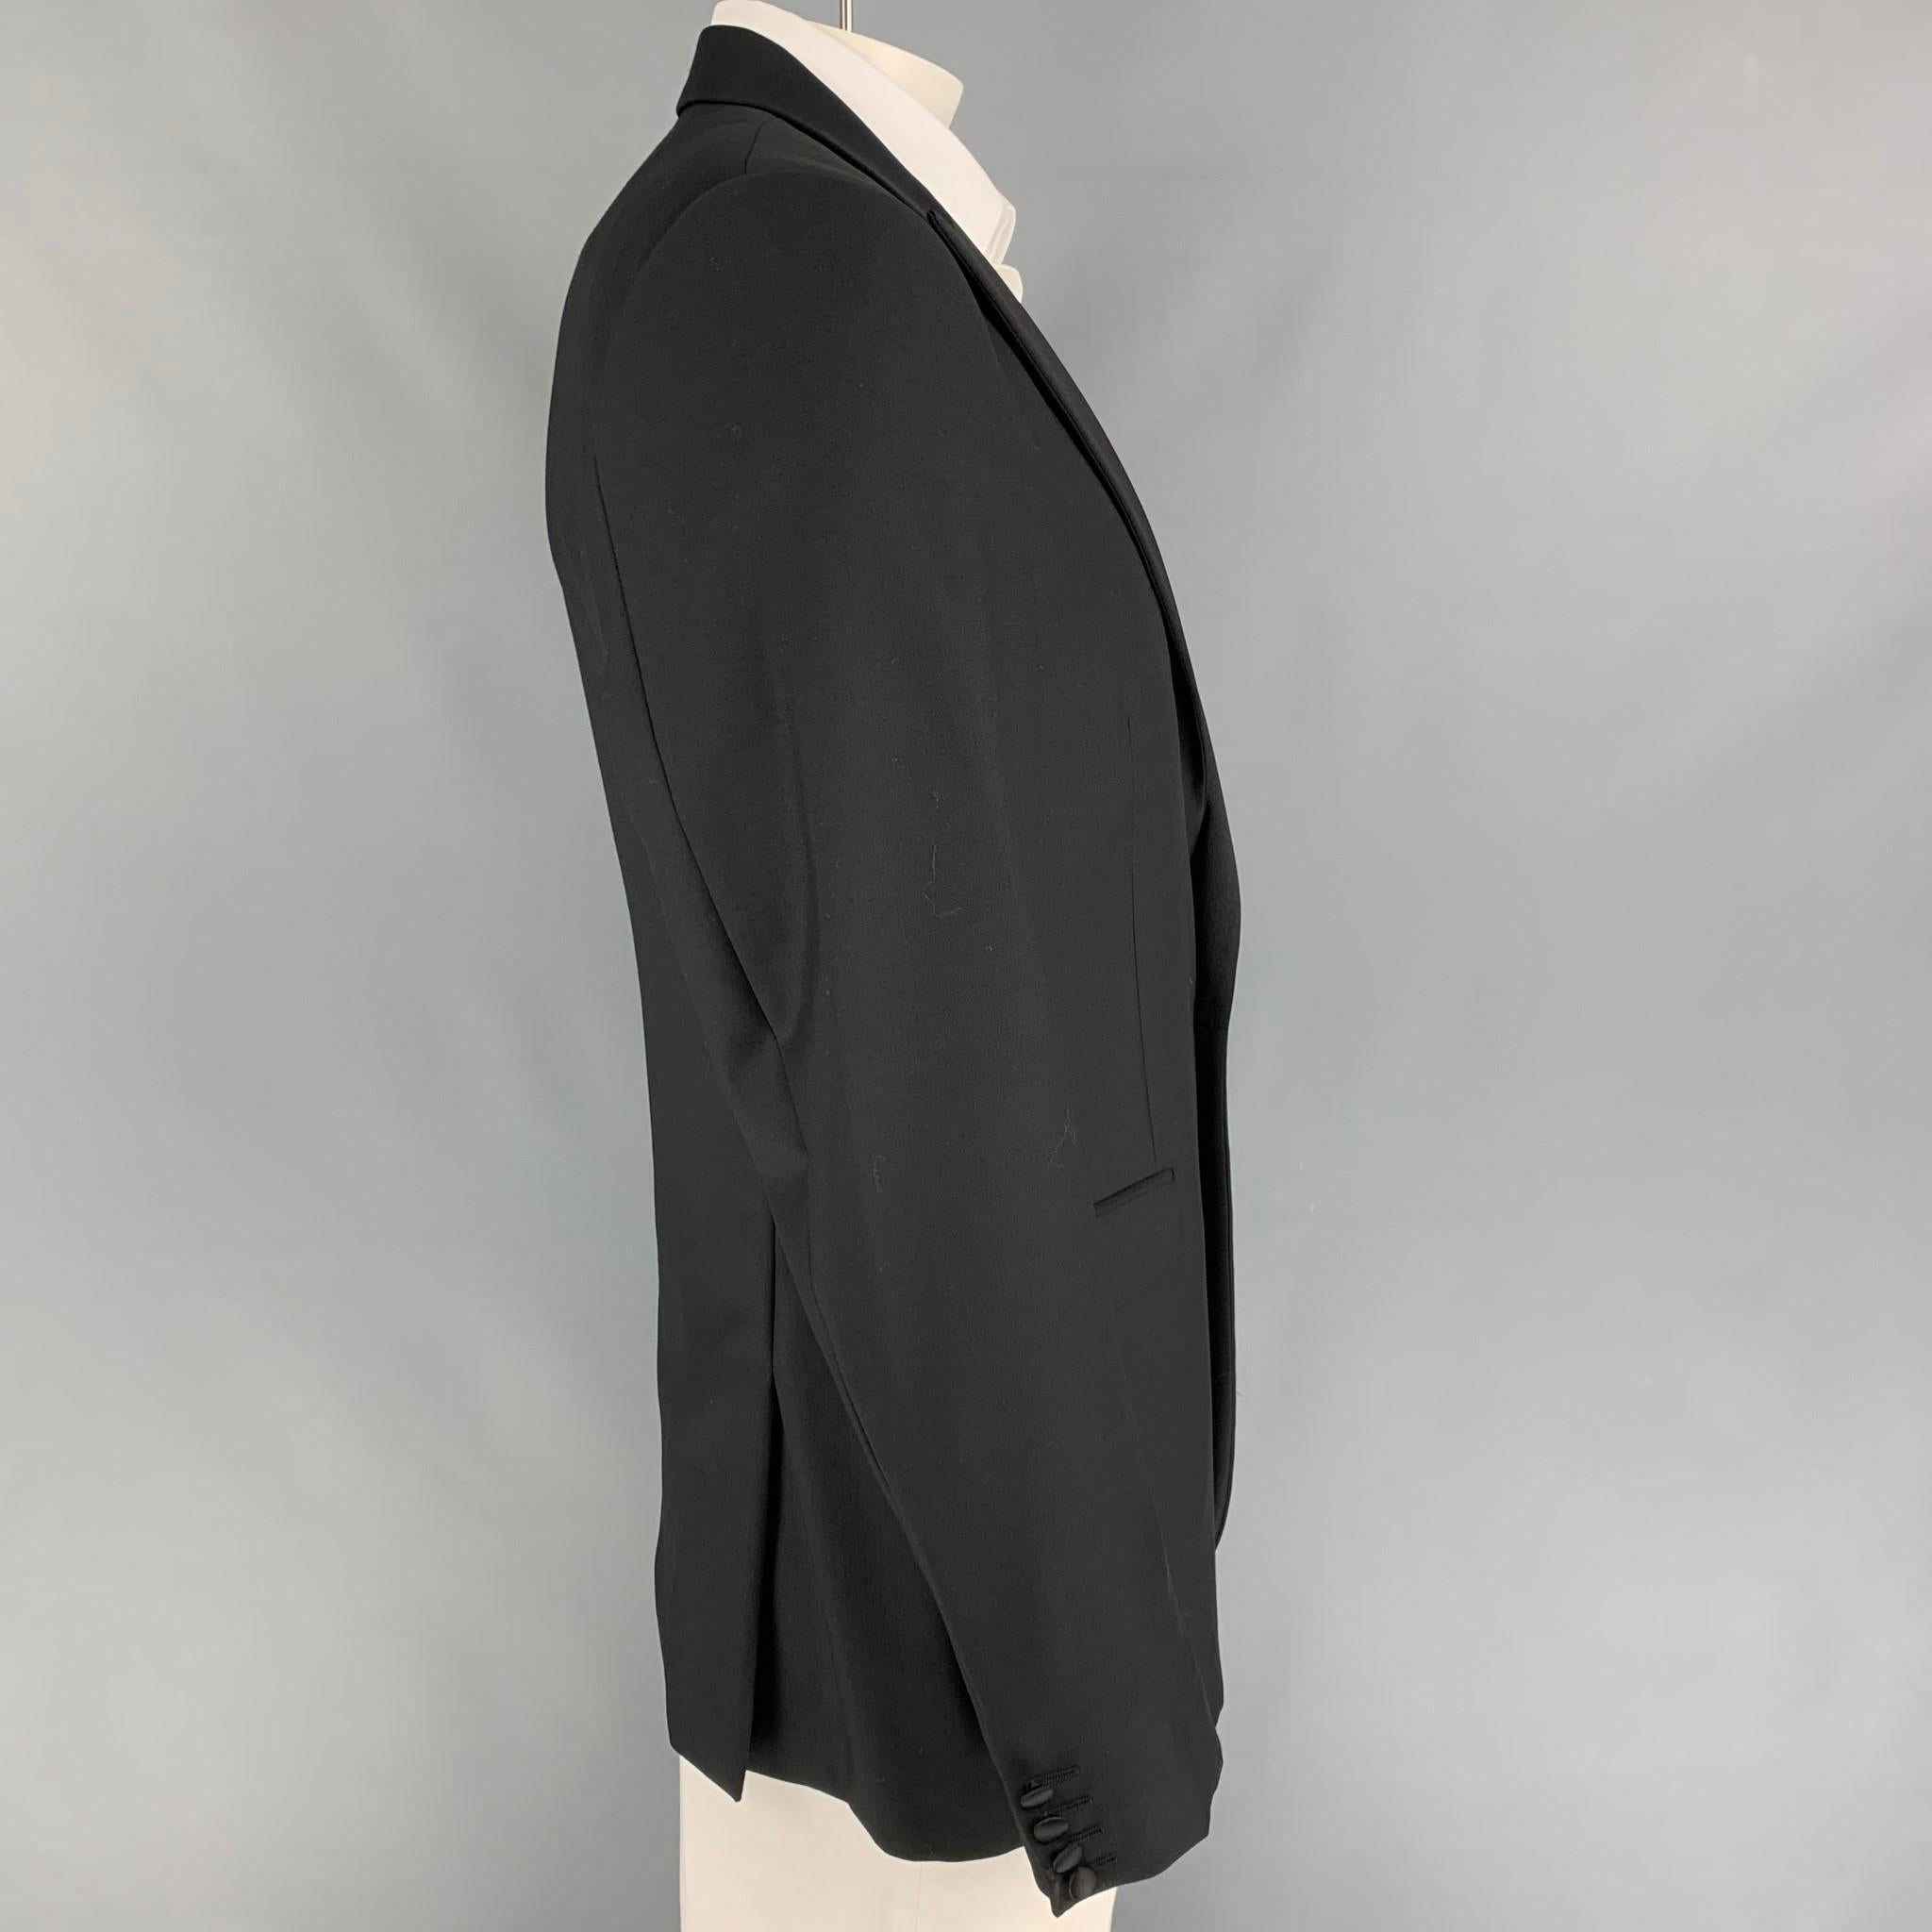 CALVIN KLEIN COLLECTION sport coat comes in a black wool with a full liner featuring a peak lapel, flap pockets, double back vent, and a single button closure. 

Very Good Pre-Owned Condition.
Marked: 54/44

Measurements:

Shoulder: 18.5 in.
Chest: